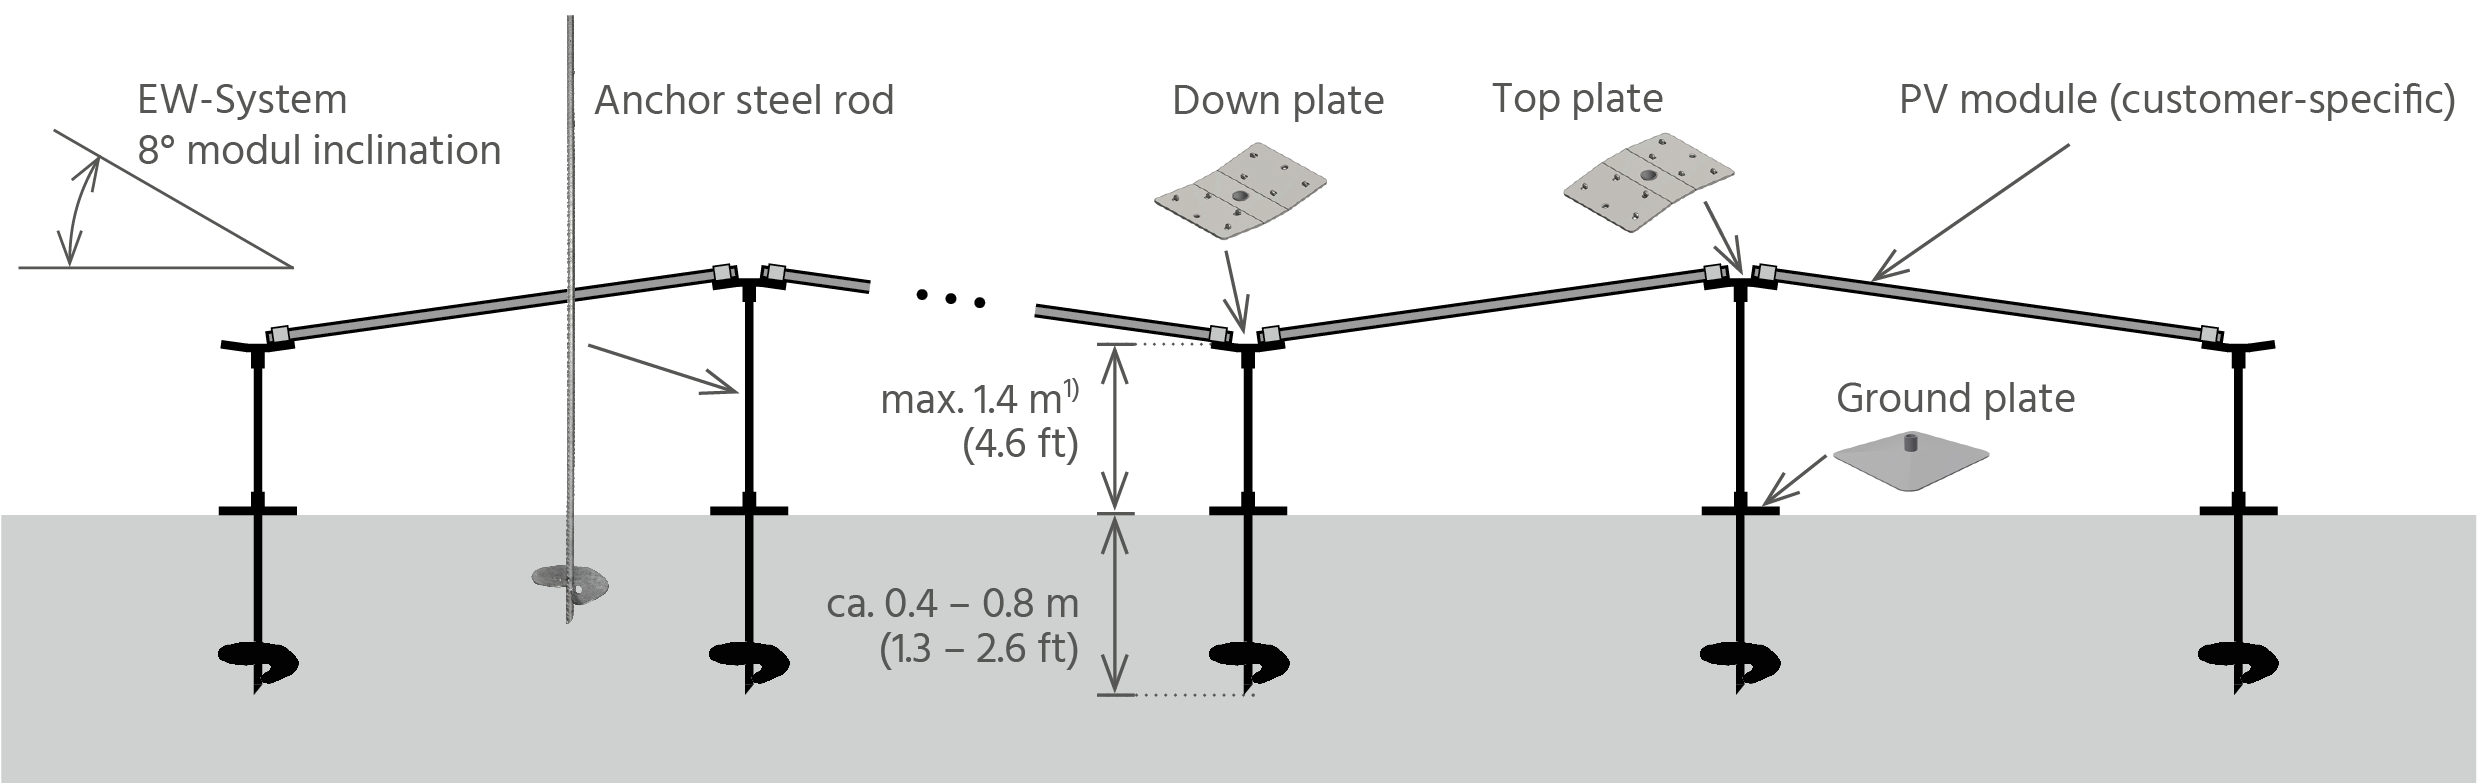 PEG Solar Mounting with Anchor Rods